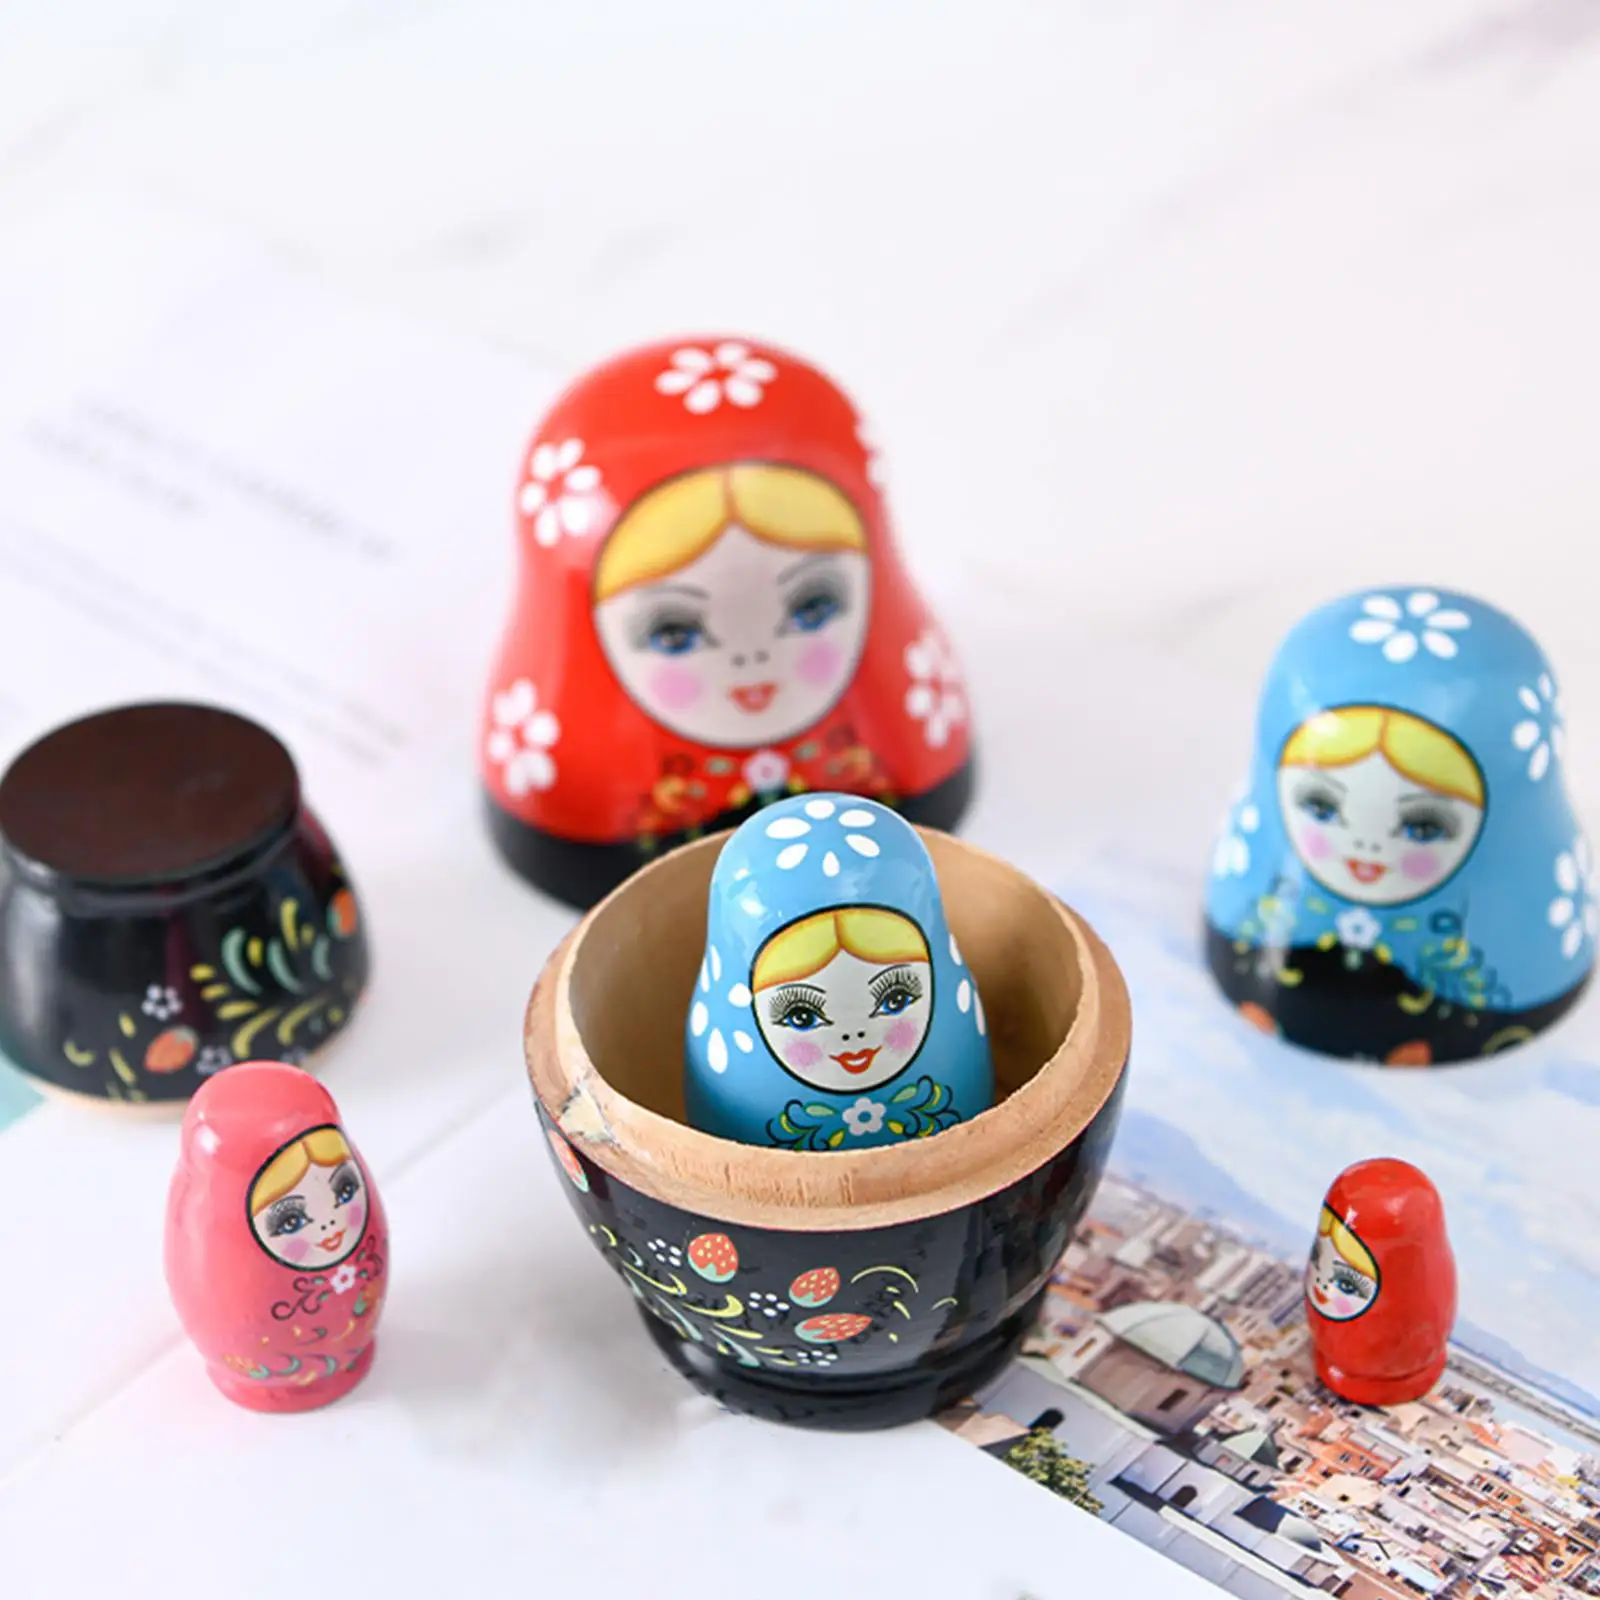 5Pcs Hand Painted Russian Matryoshka Nesting Dolls for Xmas Gifts Party Prop